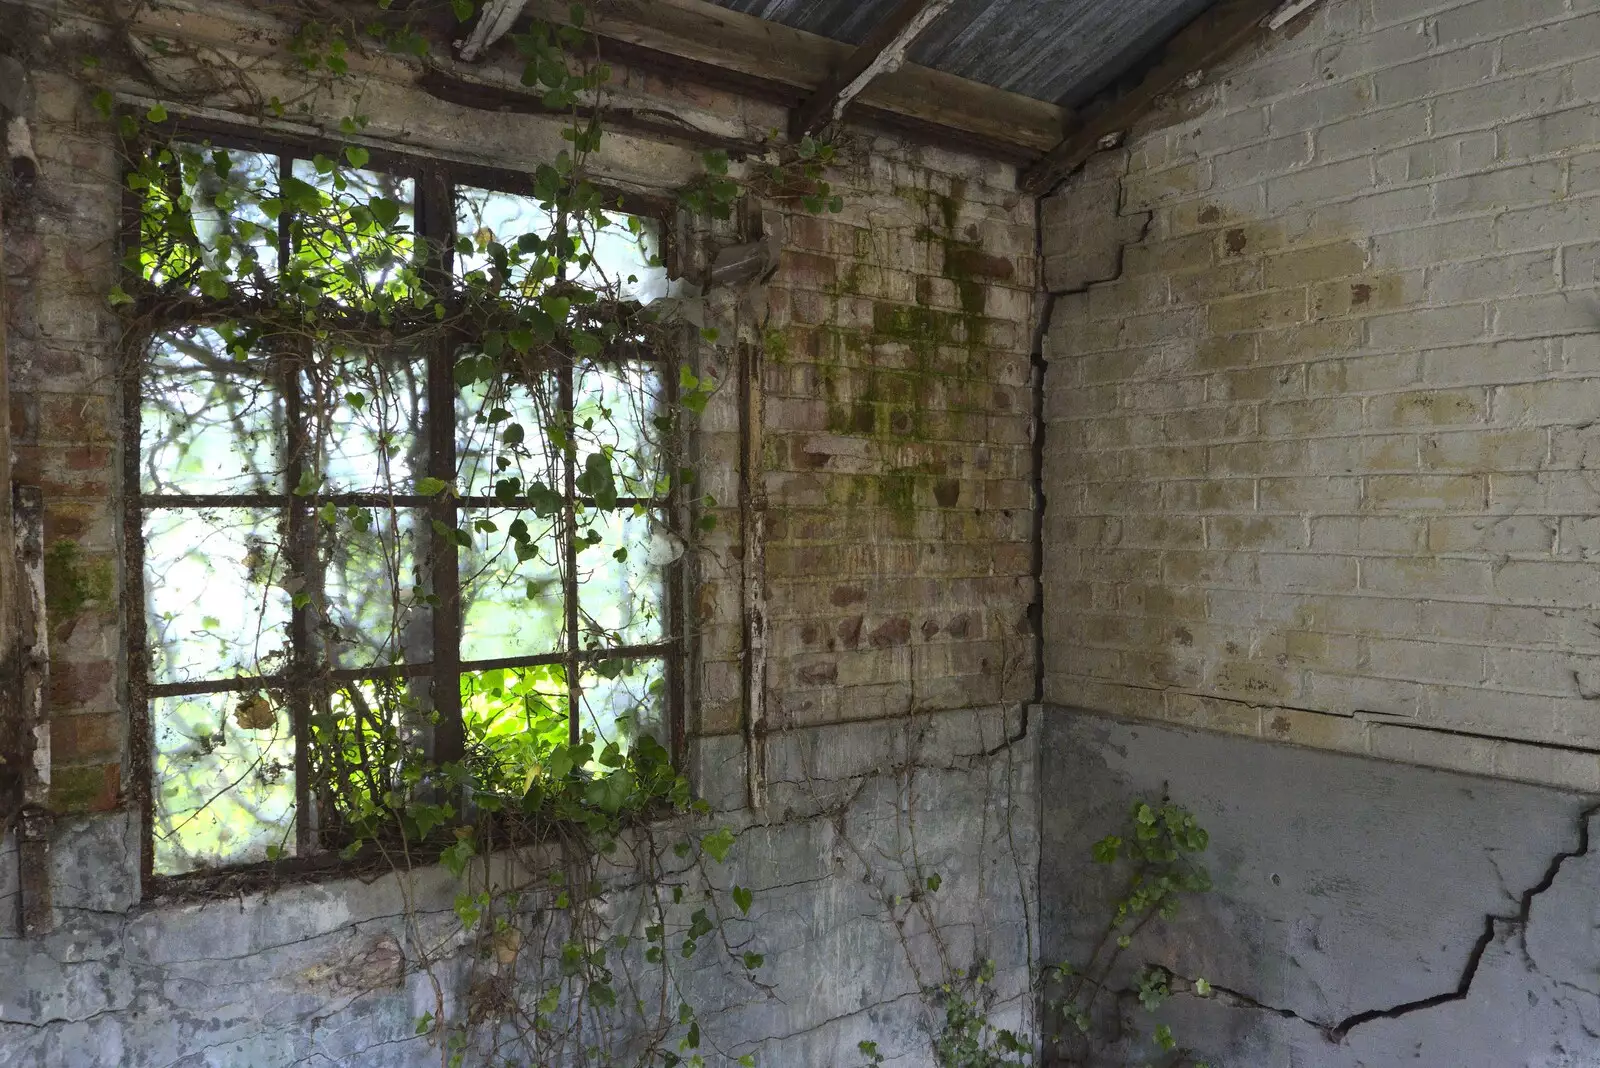 More ivy, and some major cracks, from A 1940s Timewarp, Site 4, Bungay Airfield, Flixton, Suffolk - 9th June 2022